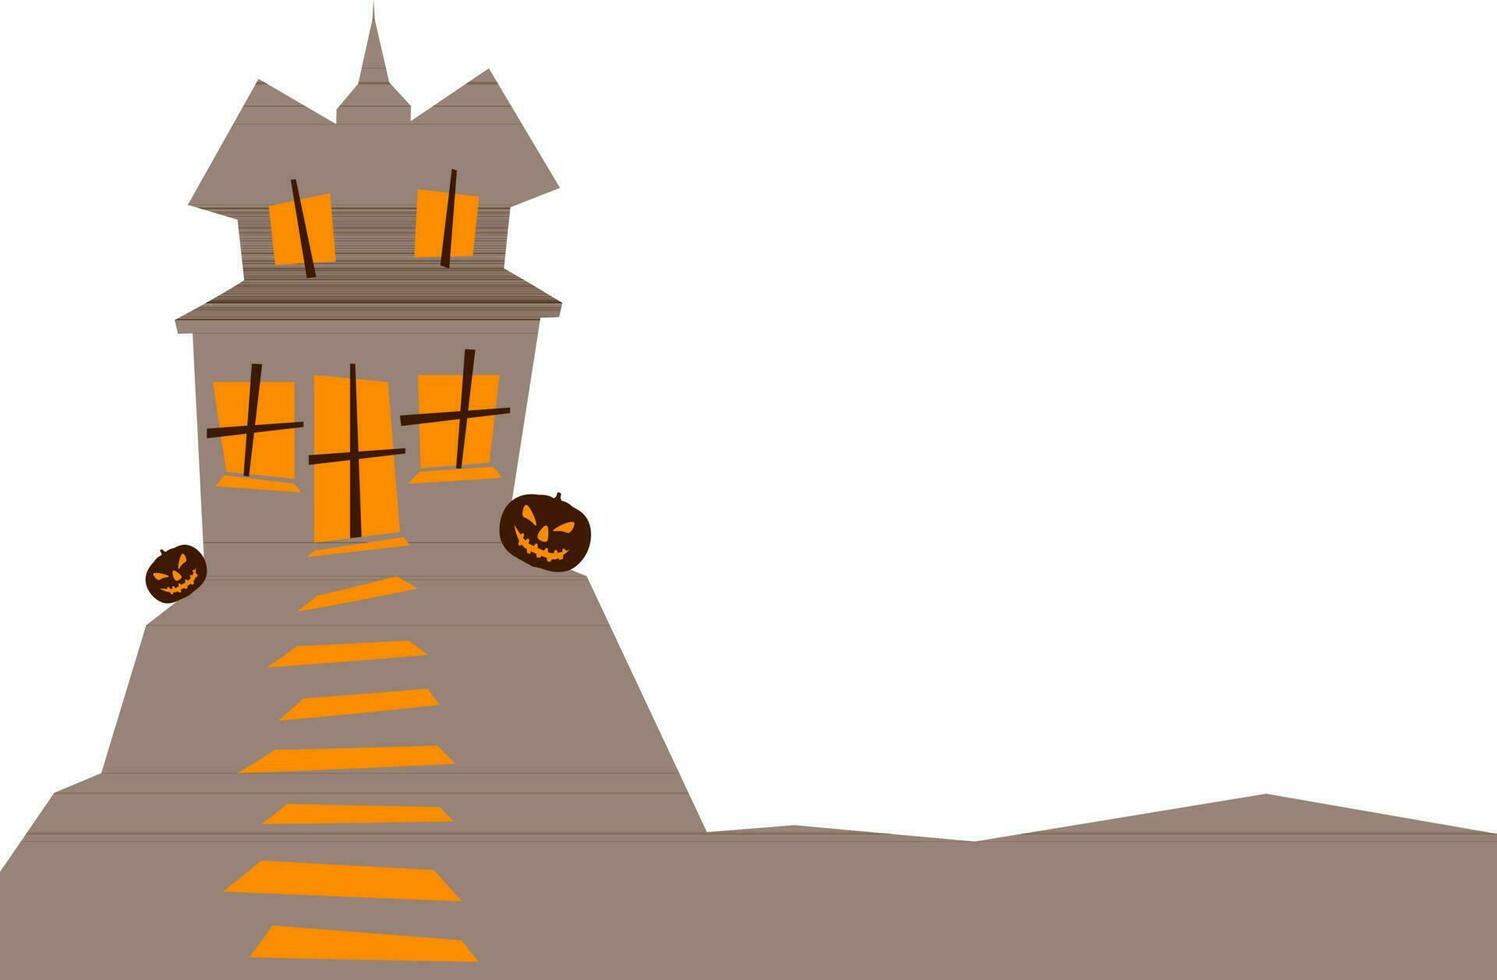 Brown haunted house with pumpkins for Halloween. vector